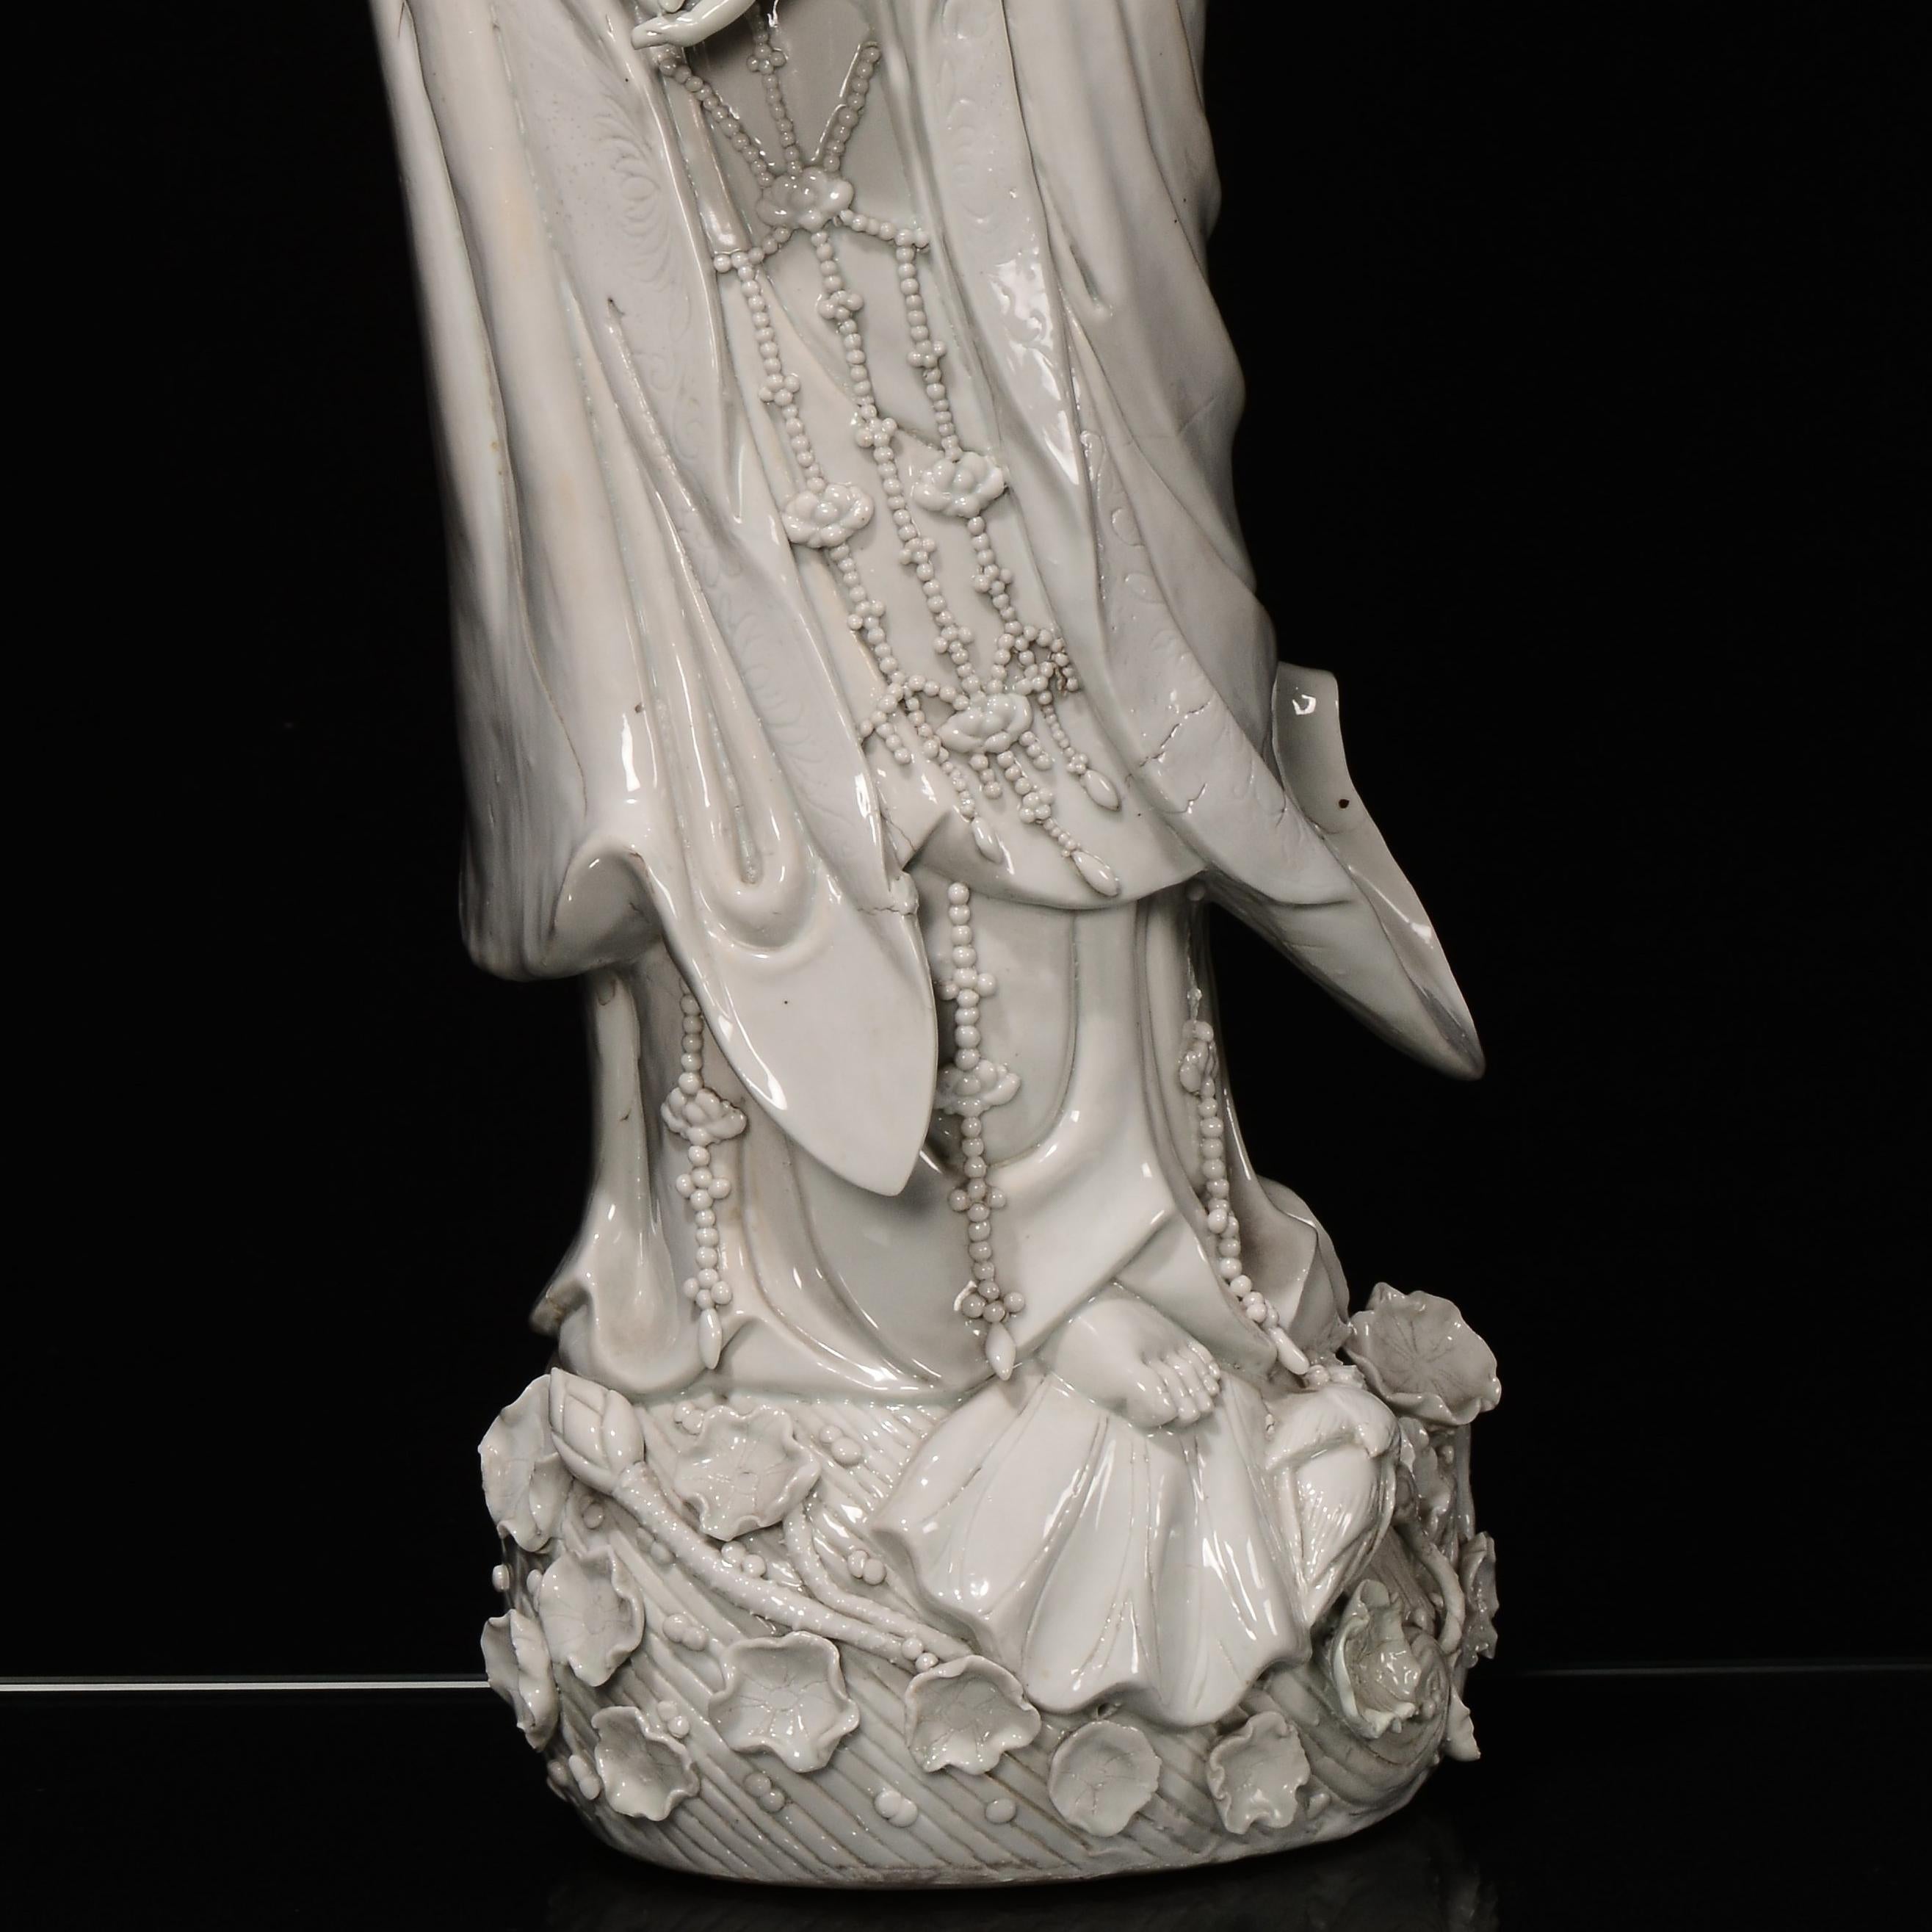 Large figure of Guanyin in White porcelain of China depicting Guan Yin, a Buddhist deity revered as the goddess of mercy, whose name is the abbreviation of the term translatable with 